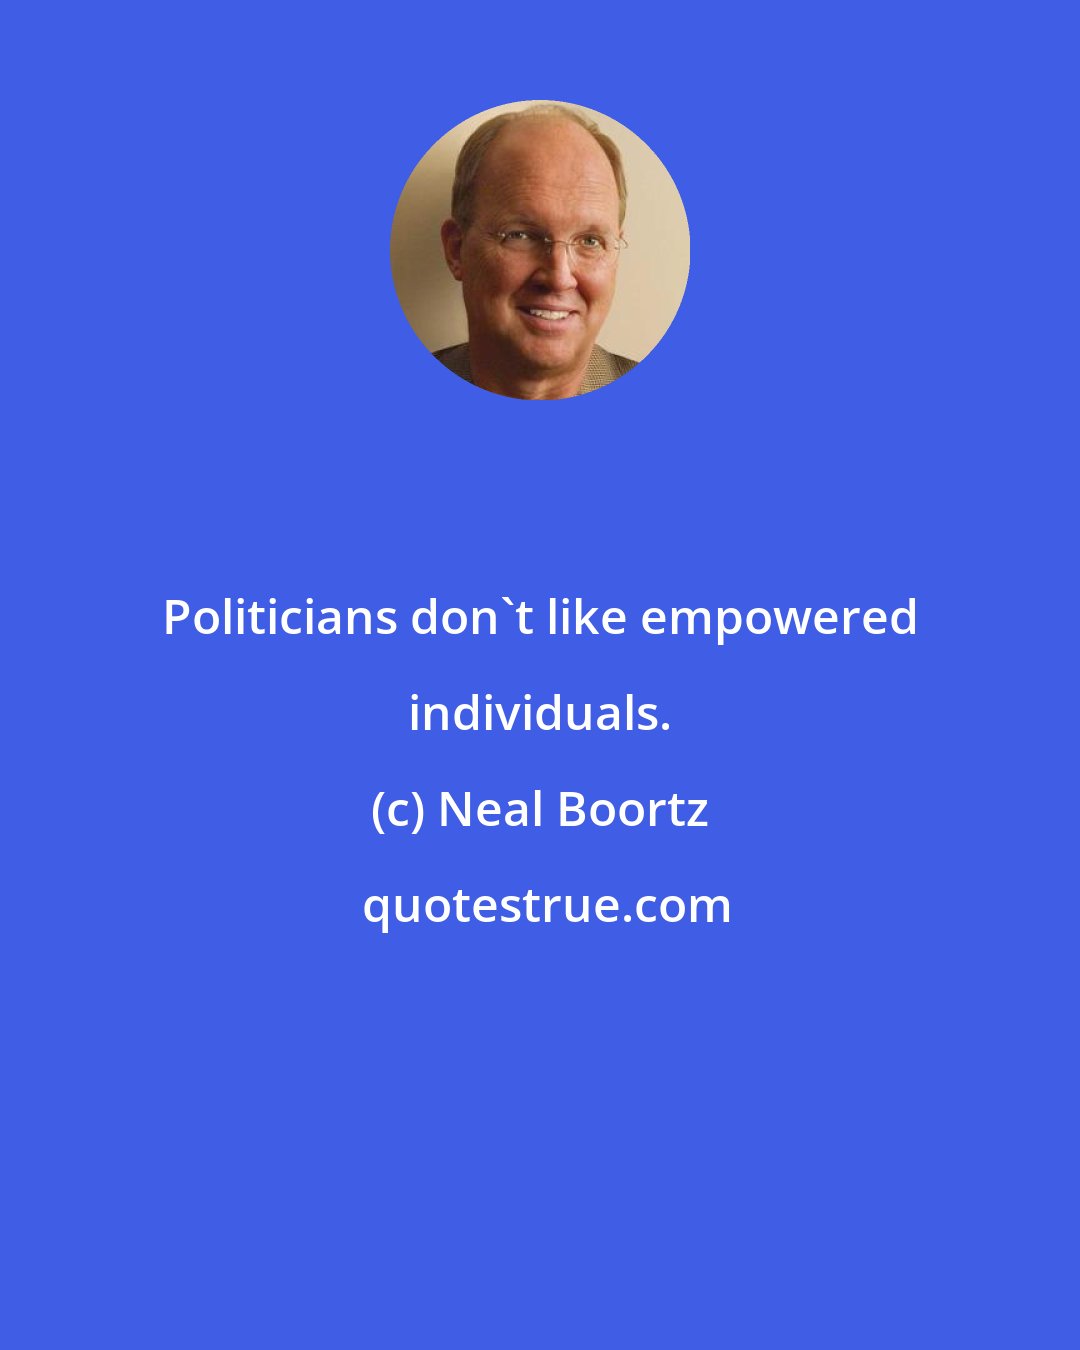 Neal Boortz: Politicians don't like empowered individuals.